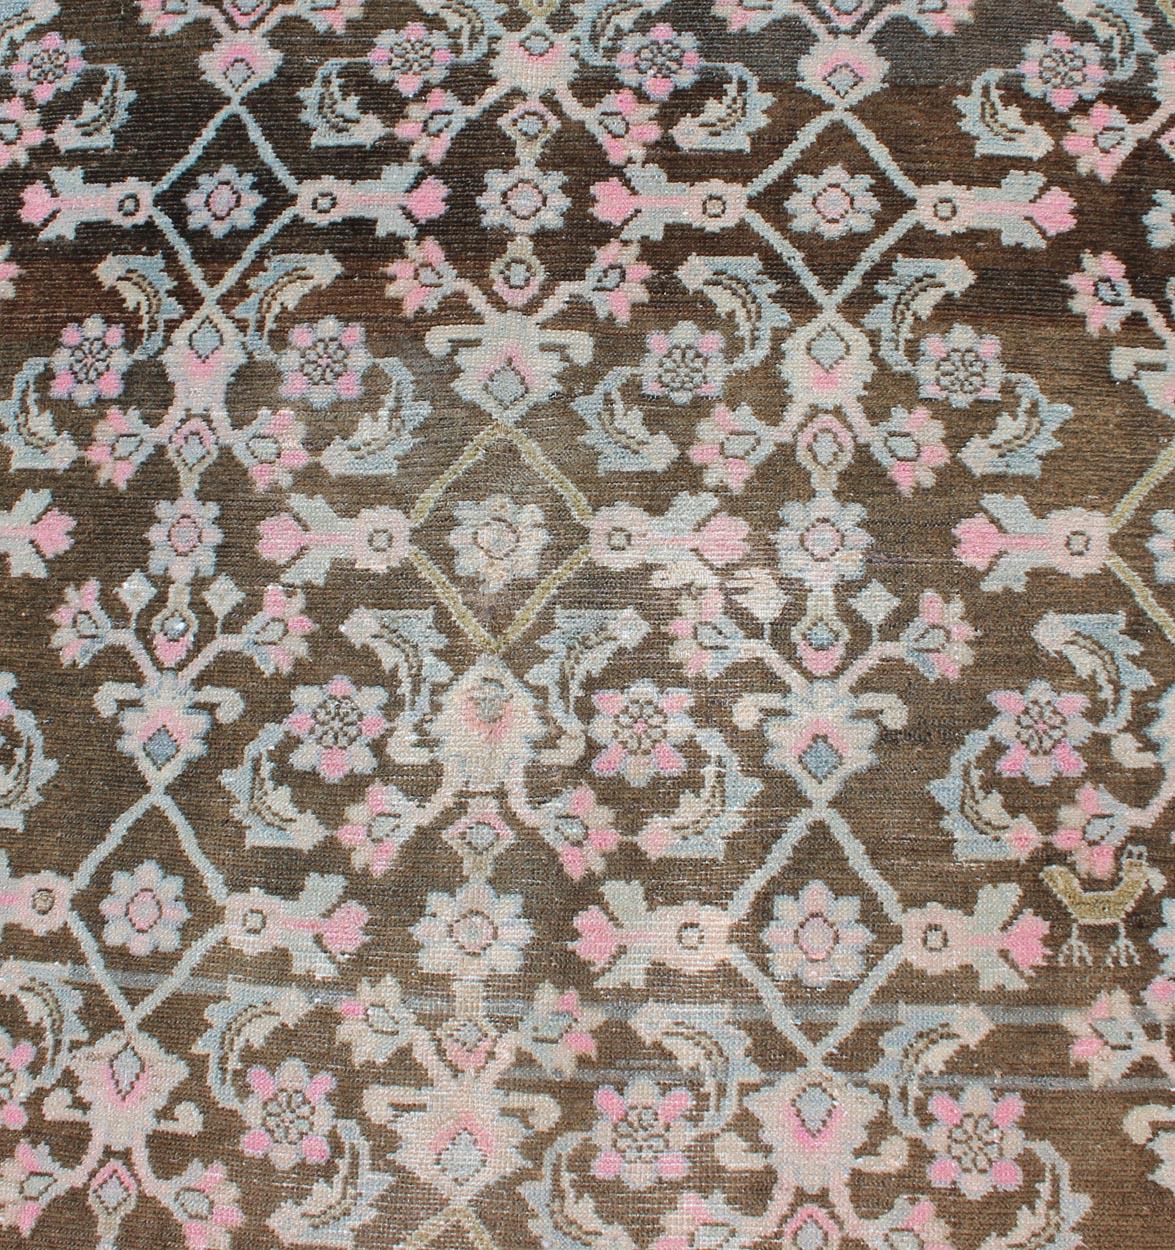 Mid-20th Century Pink, Gray, Charcoal and Brown Vintage Persian Hamadan Rug with Flower Design For Sale